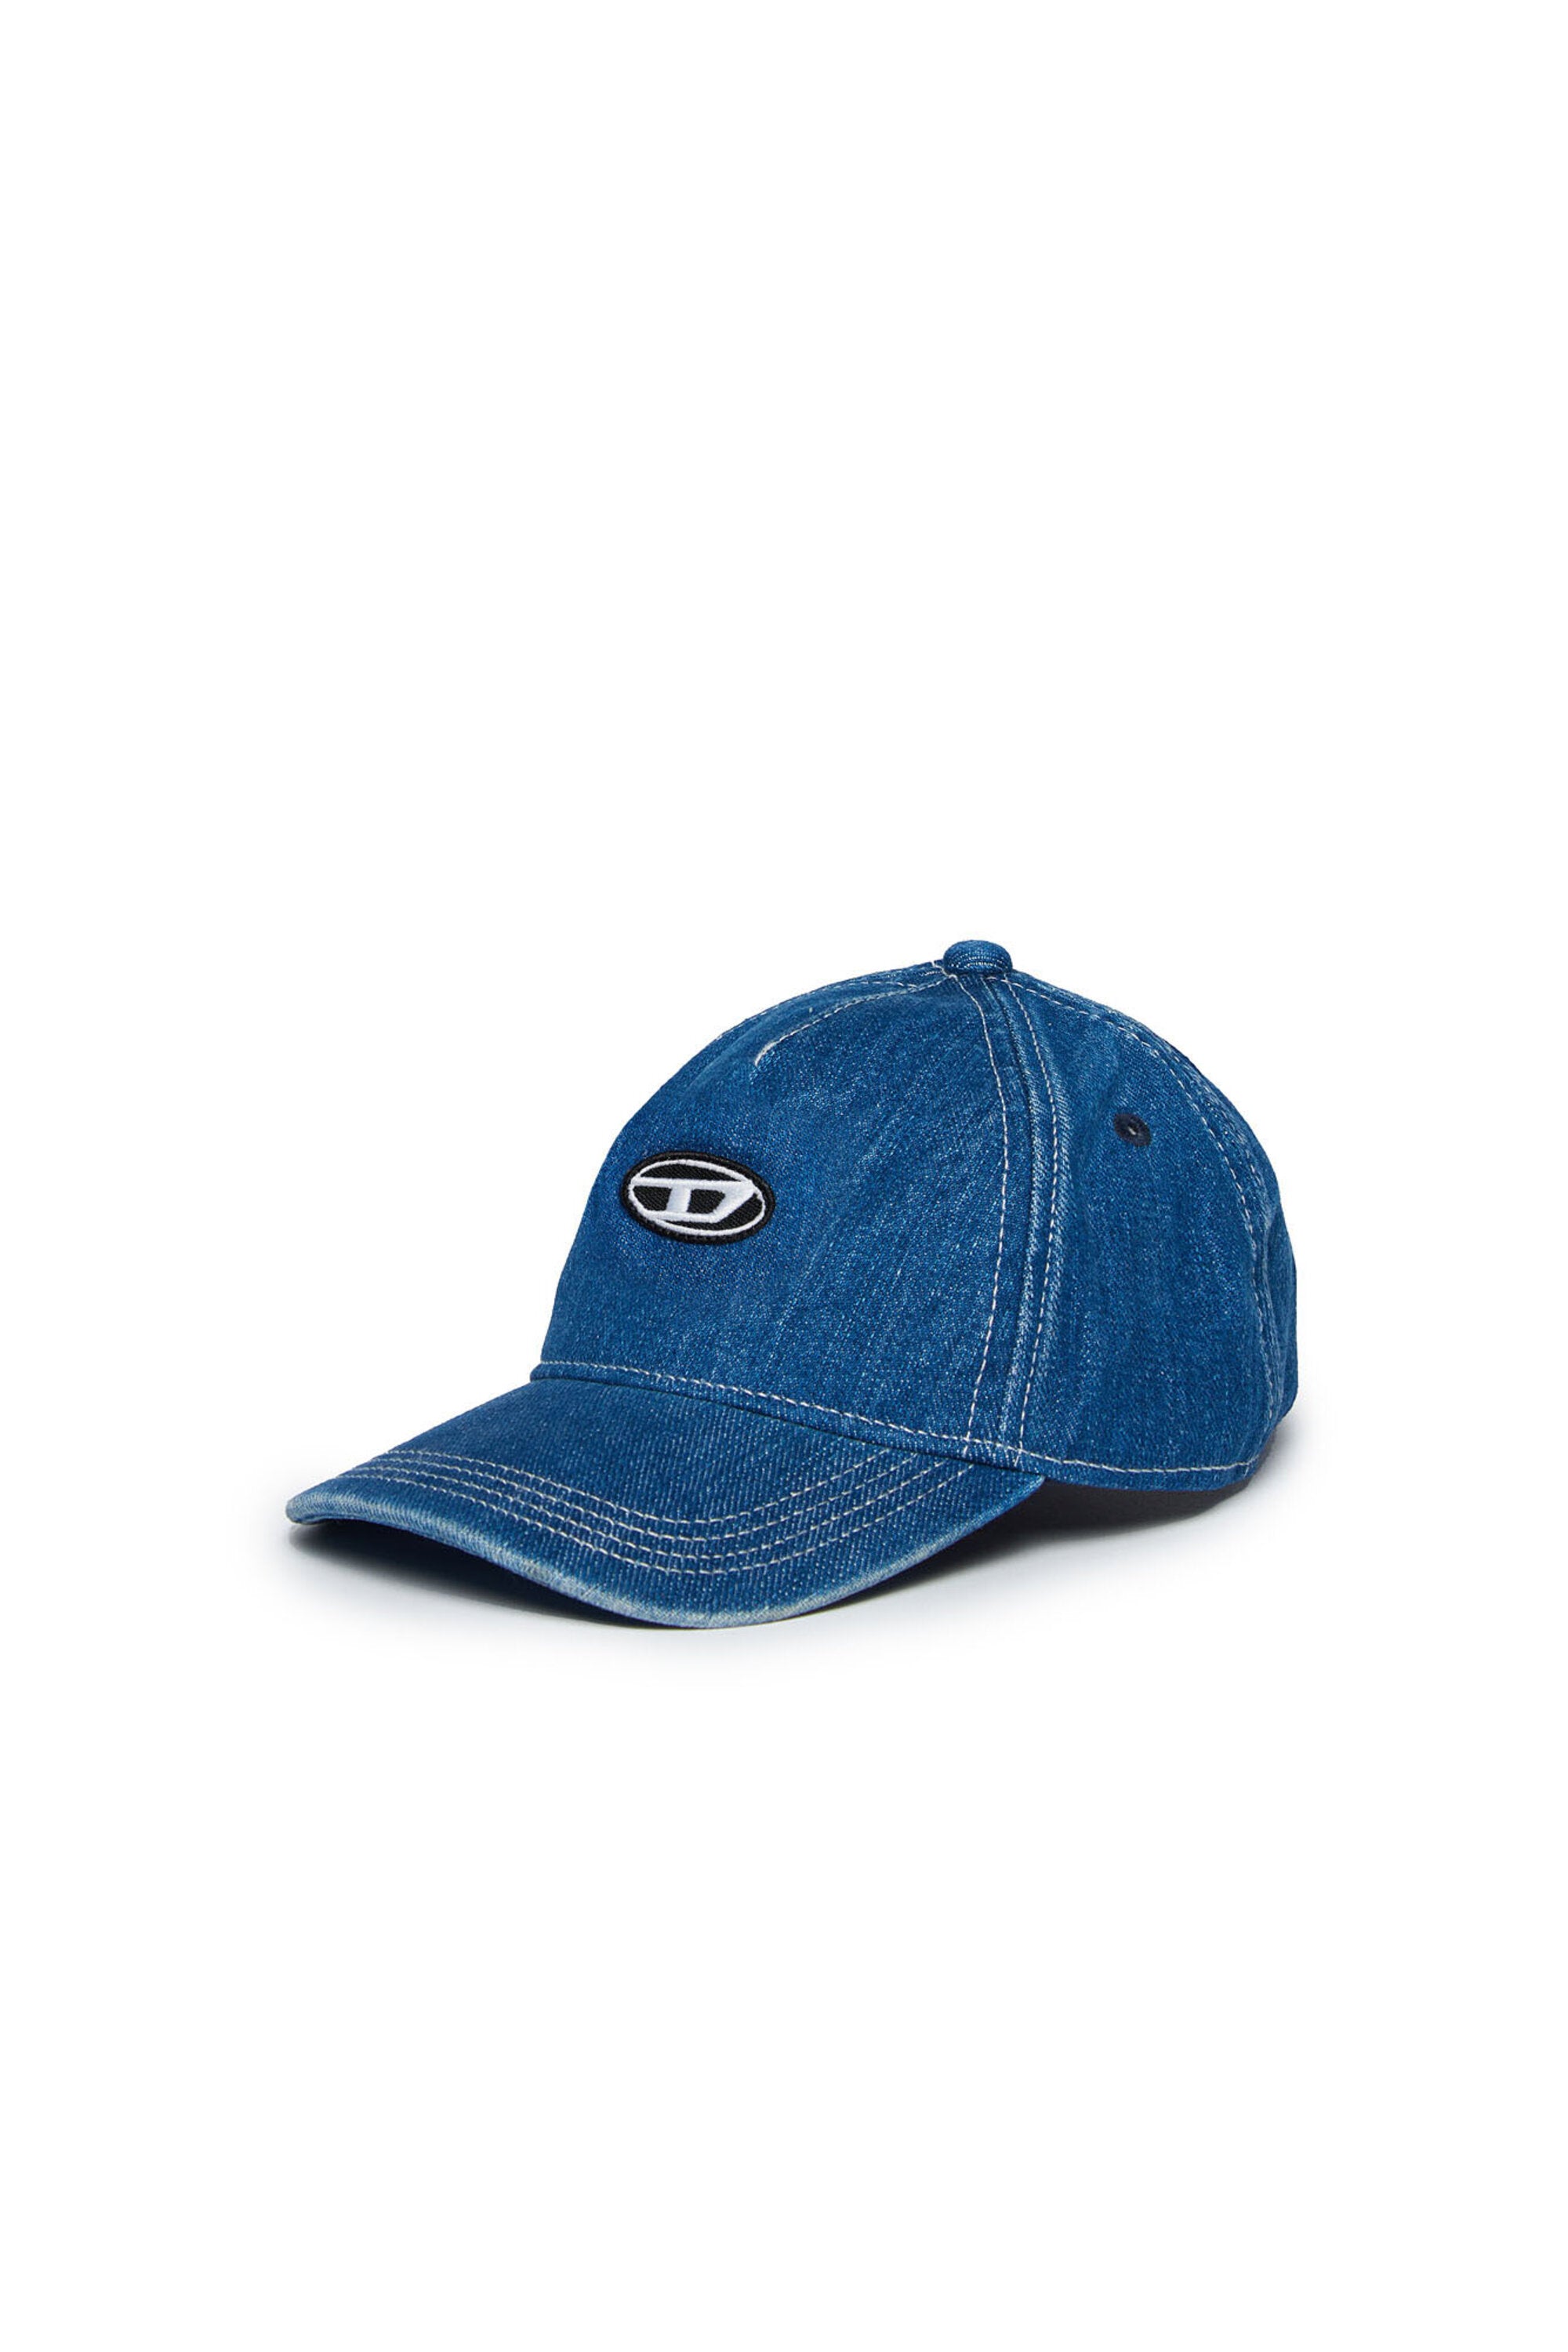 Denim baseball cap with Oval D patch